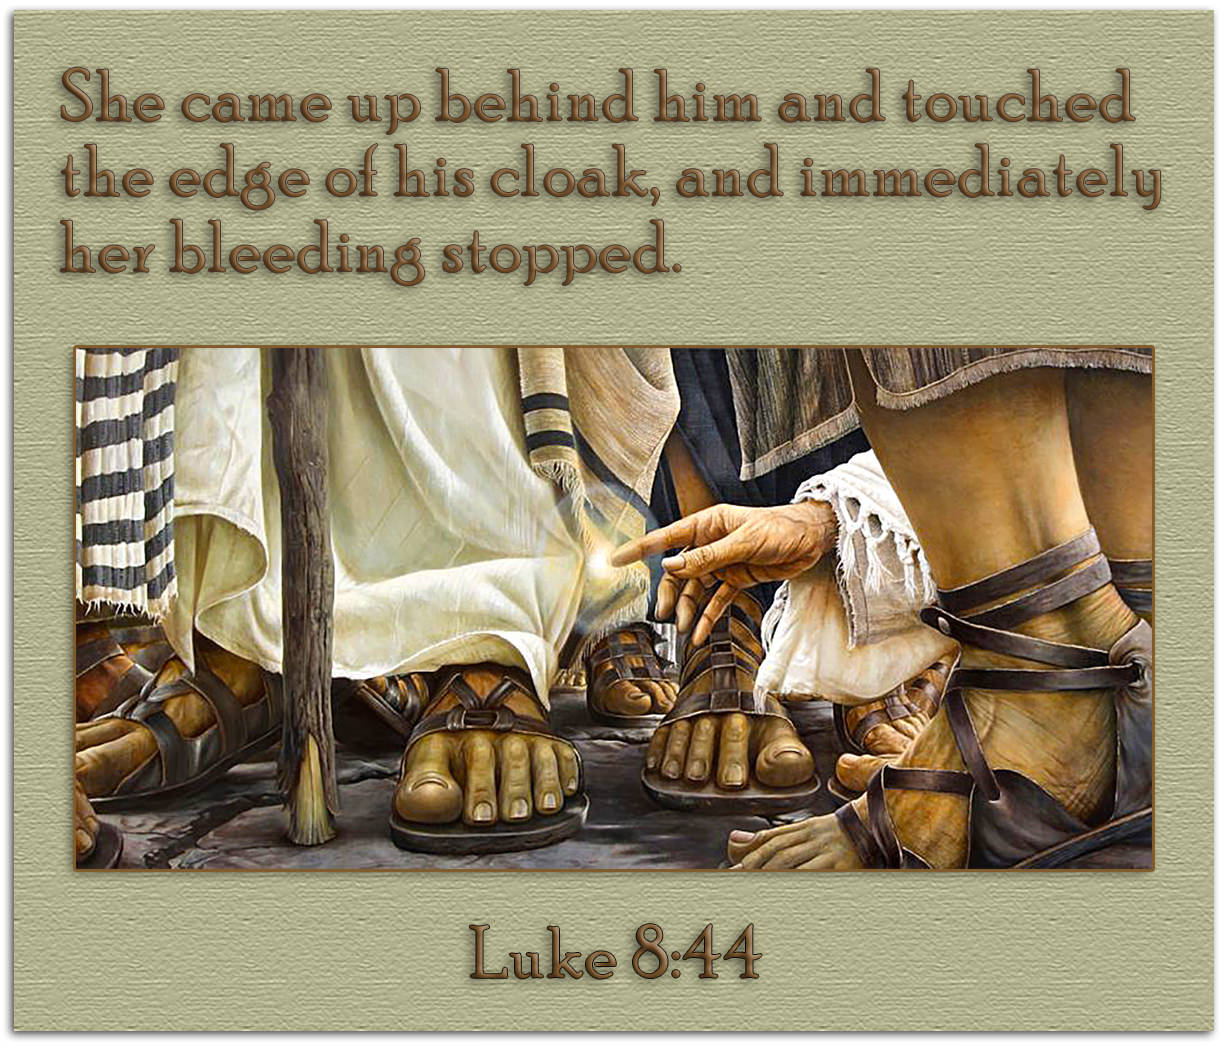 Scripture picture of Luke 8:44, emphasizing the woman's touch of the edge of Jesus' cloak